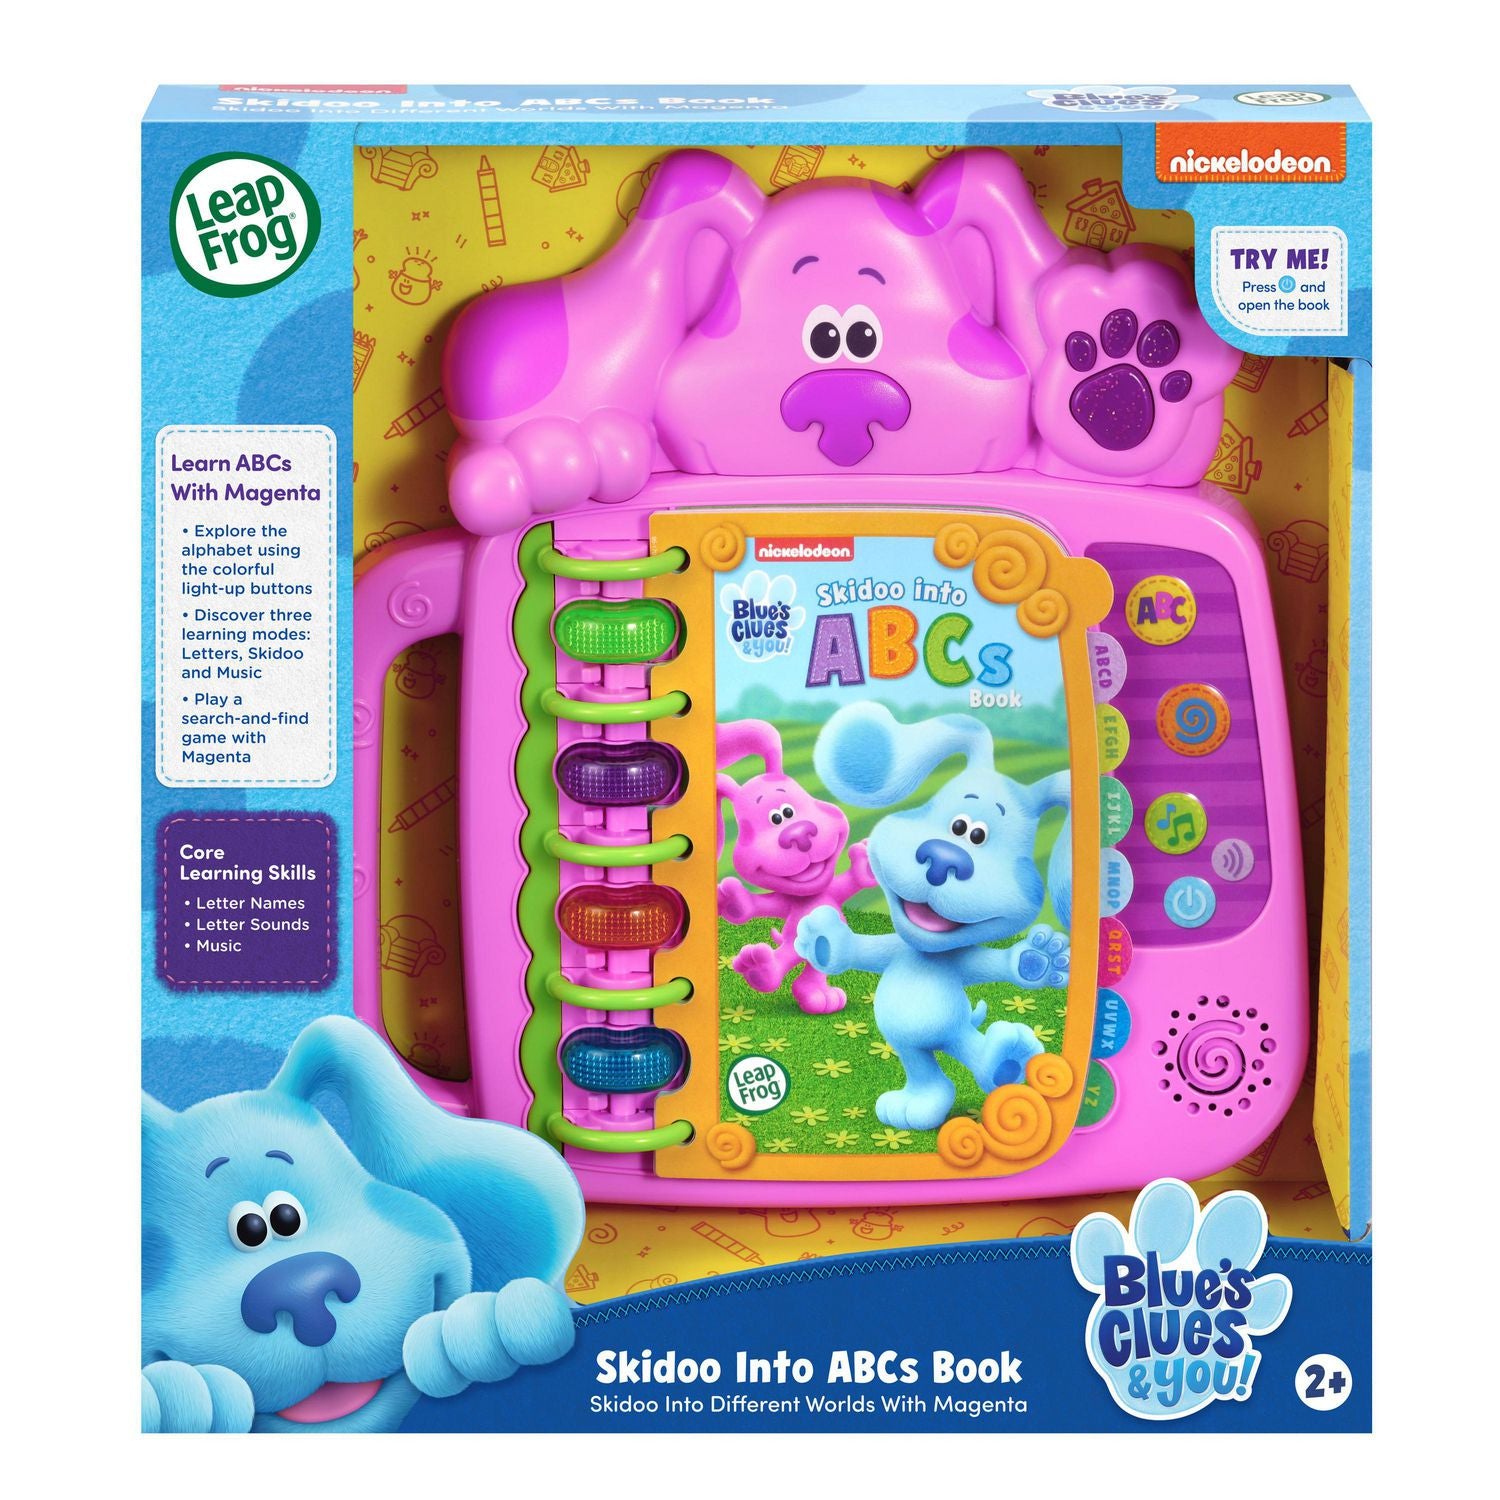 LeapFrog Blue's Clues & You! Skidoo Into ABCs Book